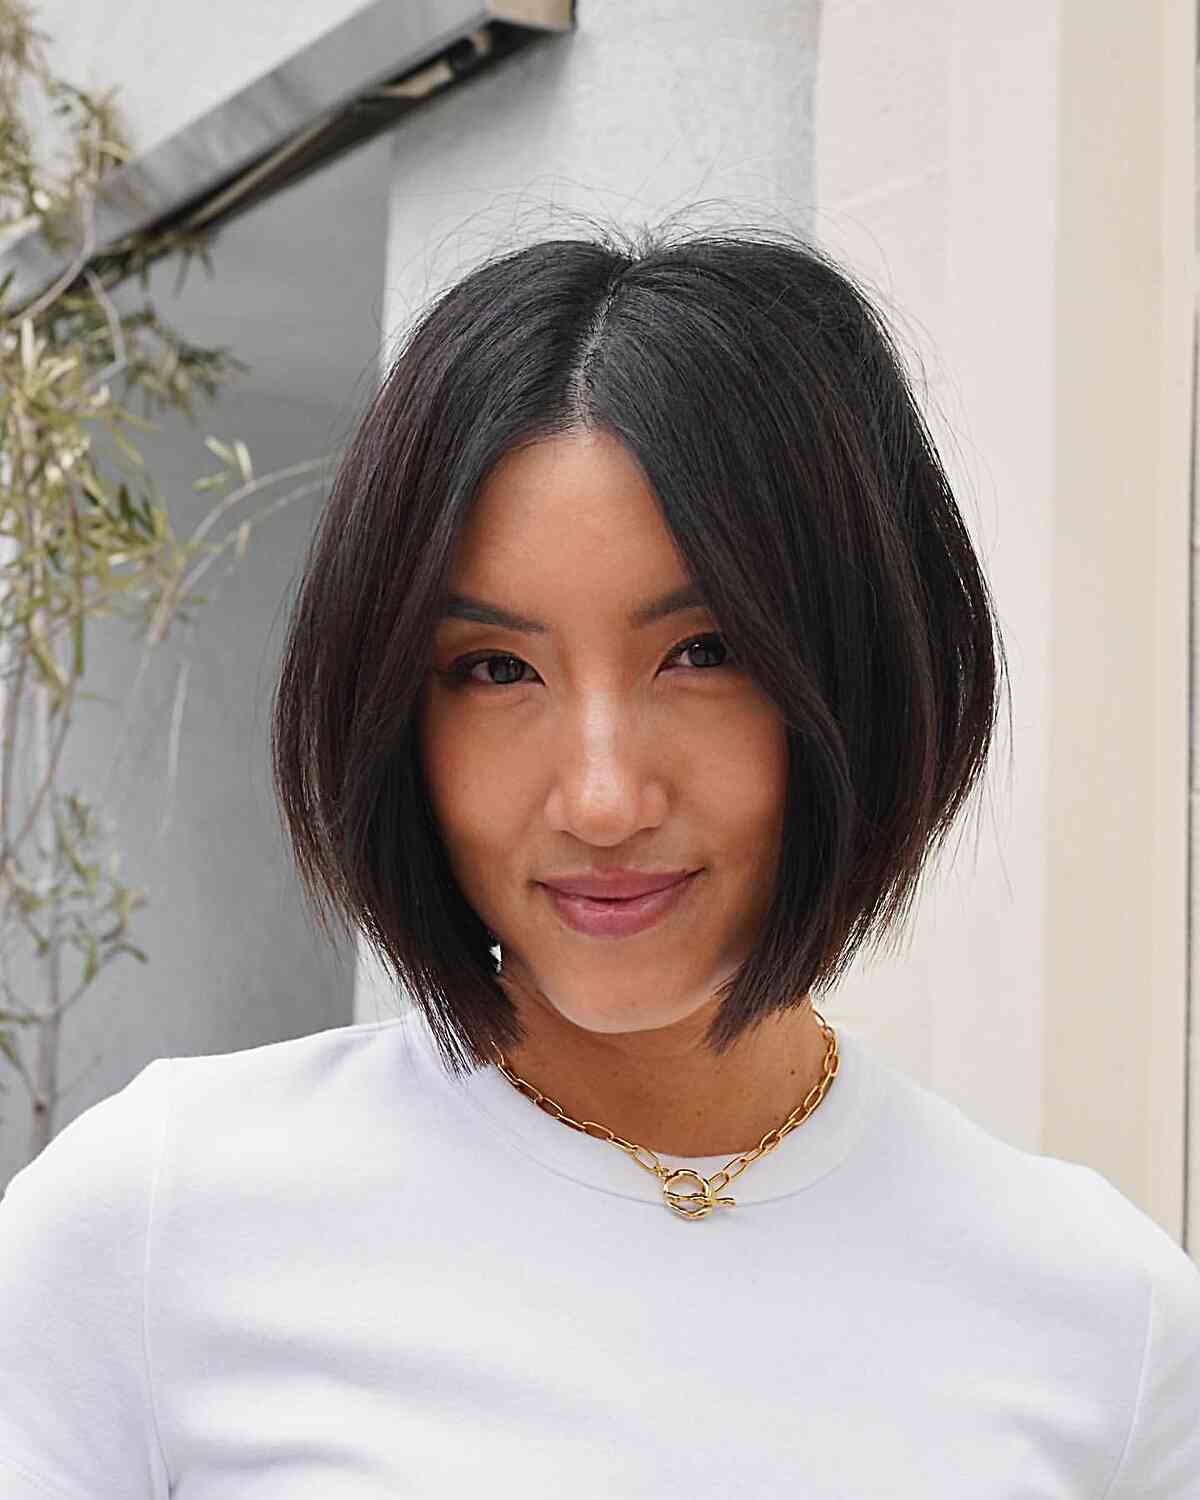 Chin-Length Layered Soft and Blunt Slob Cut for fine hair